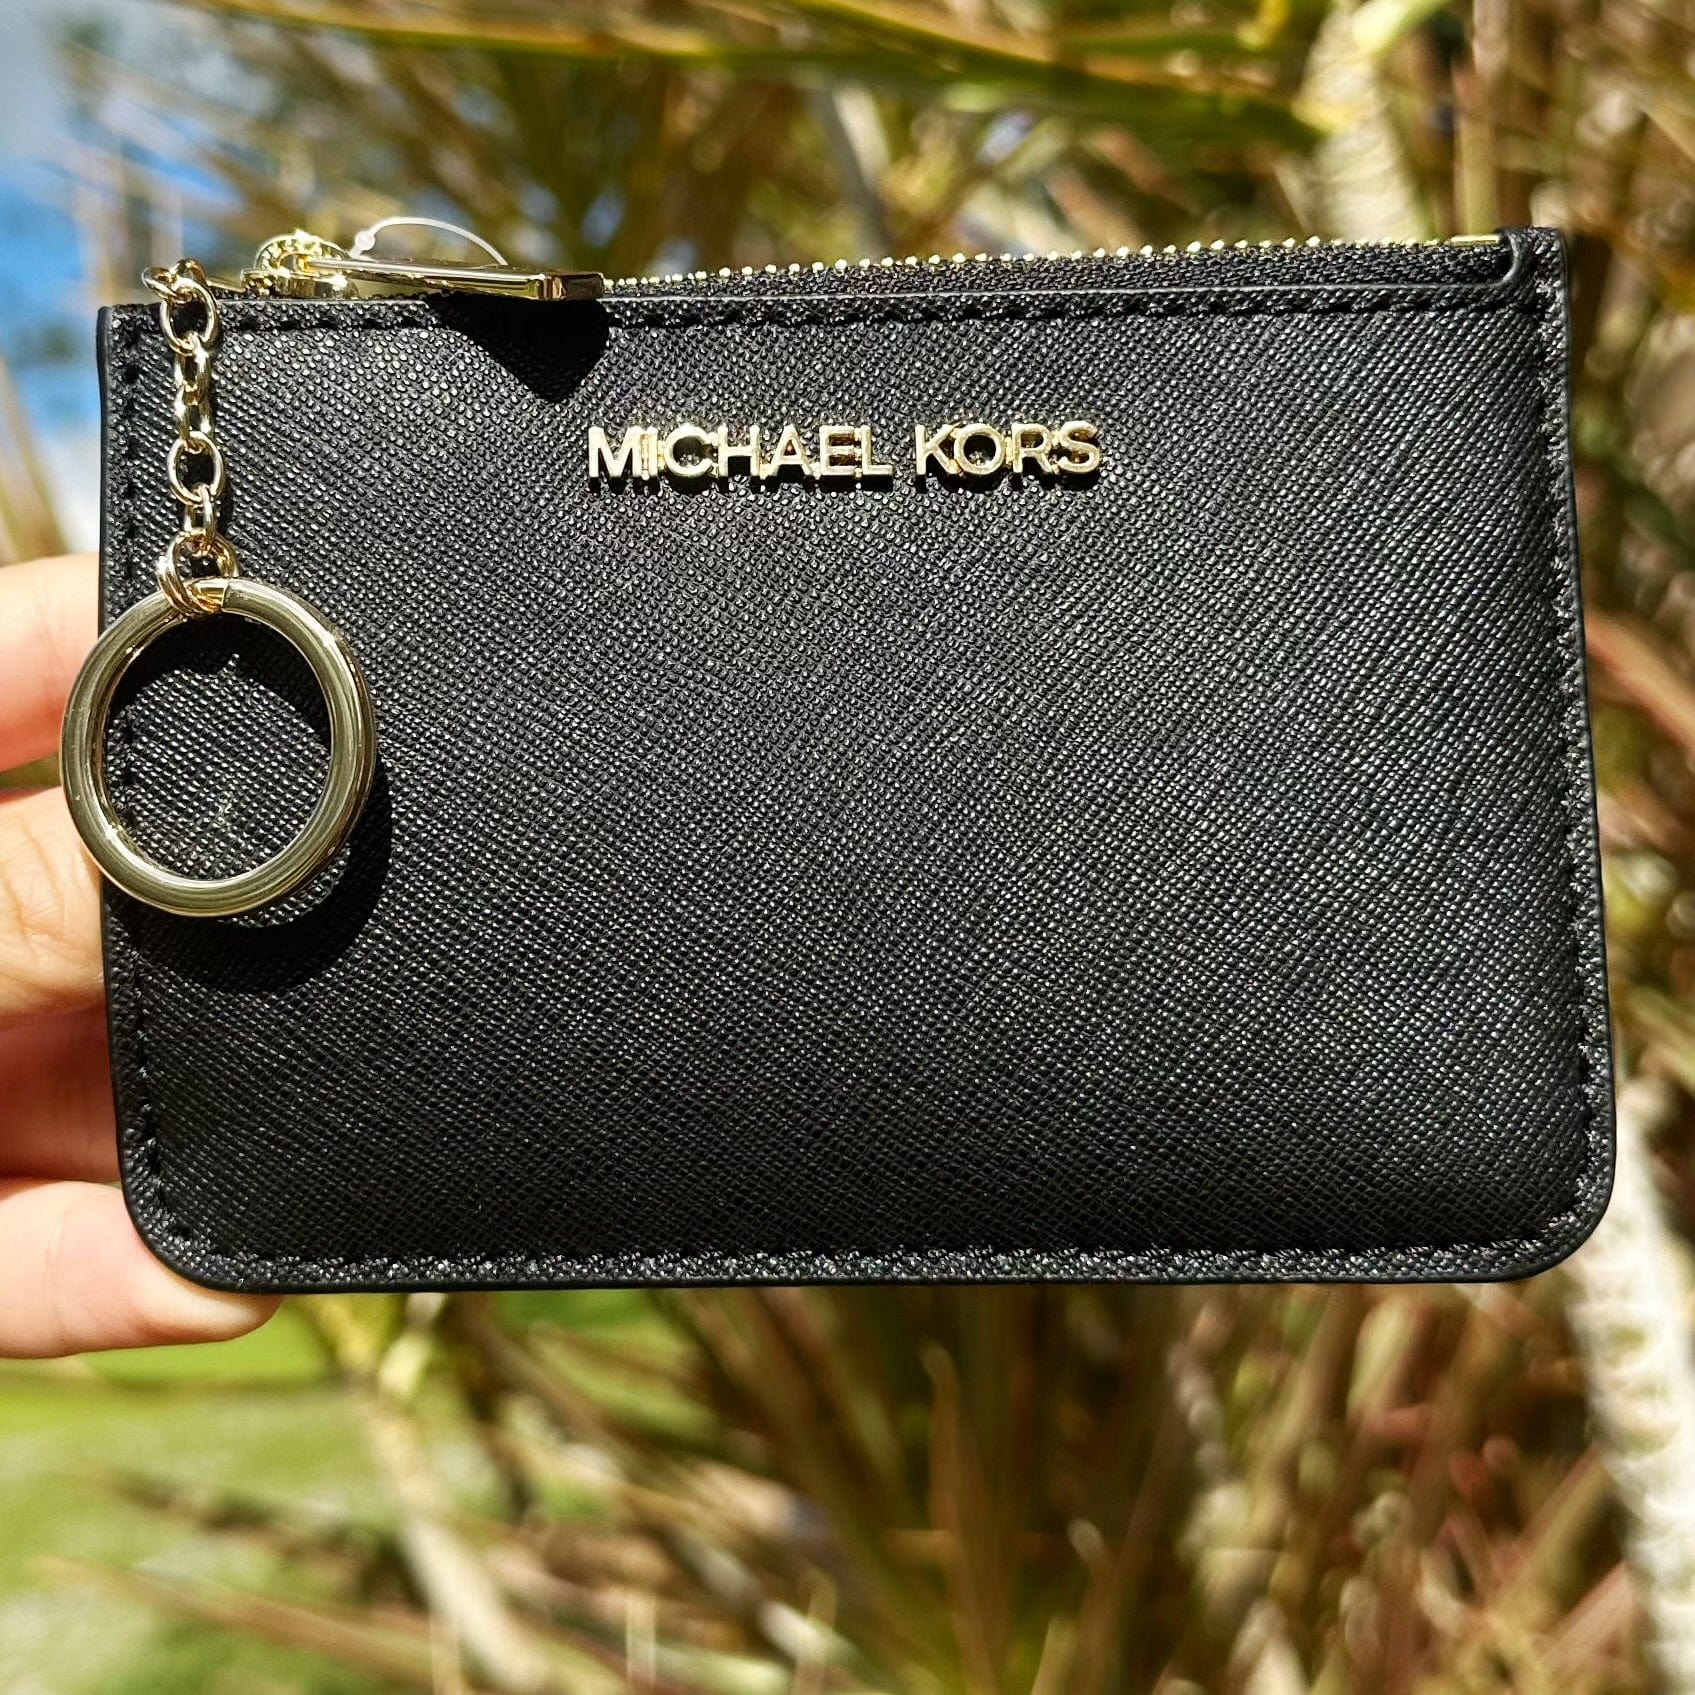 Michael Kors Jet Set Small Zip Coin Wallet Key Ring Card Holder Black Leather